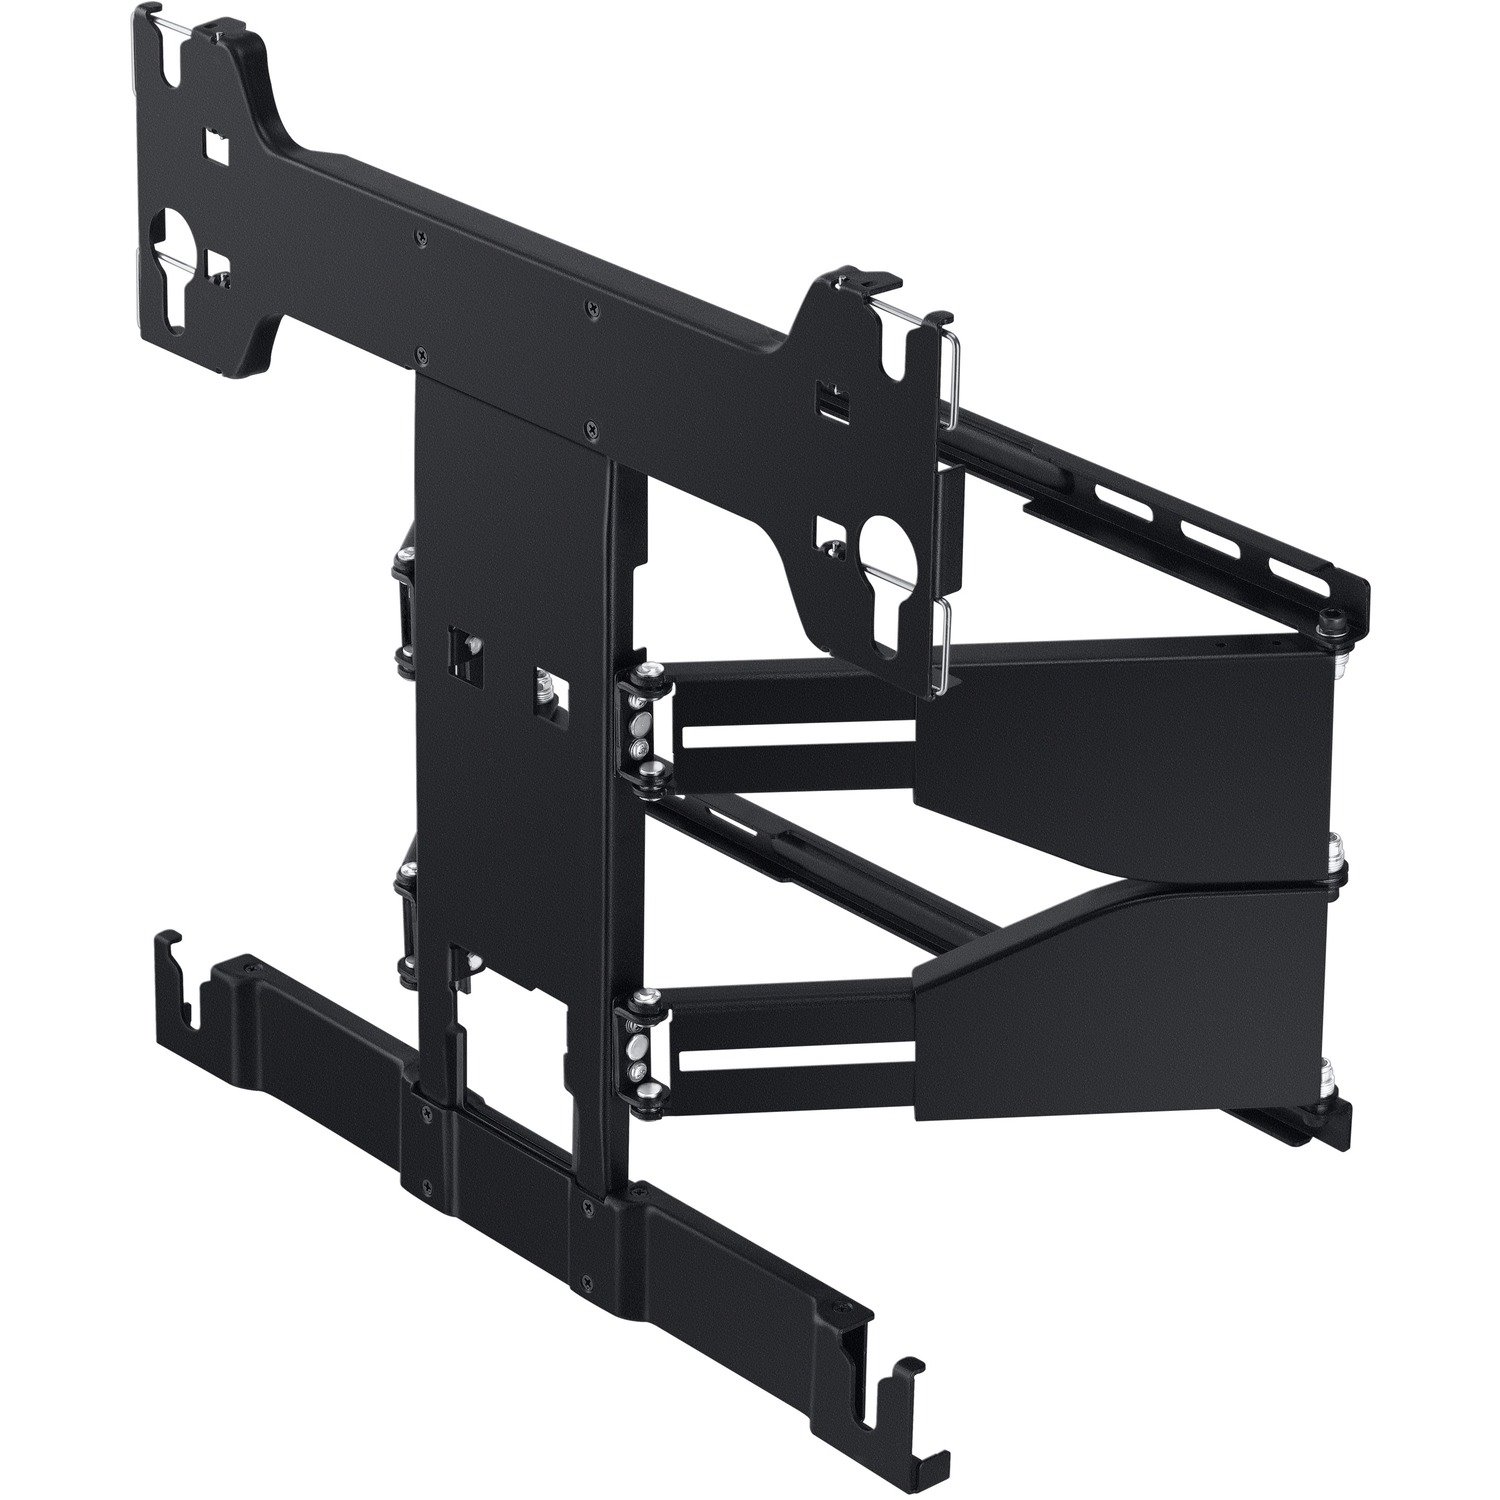 Samsung Wall Mount for TV - Black